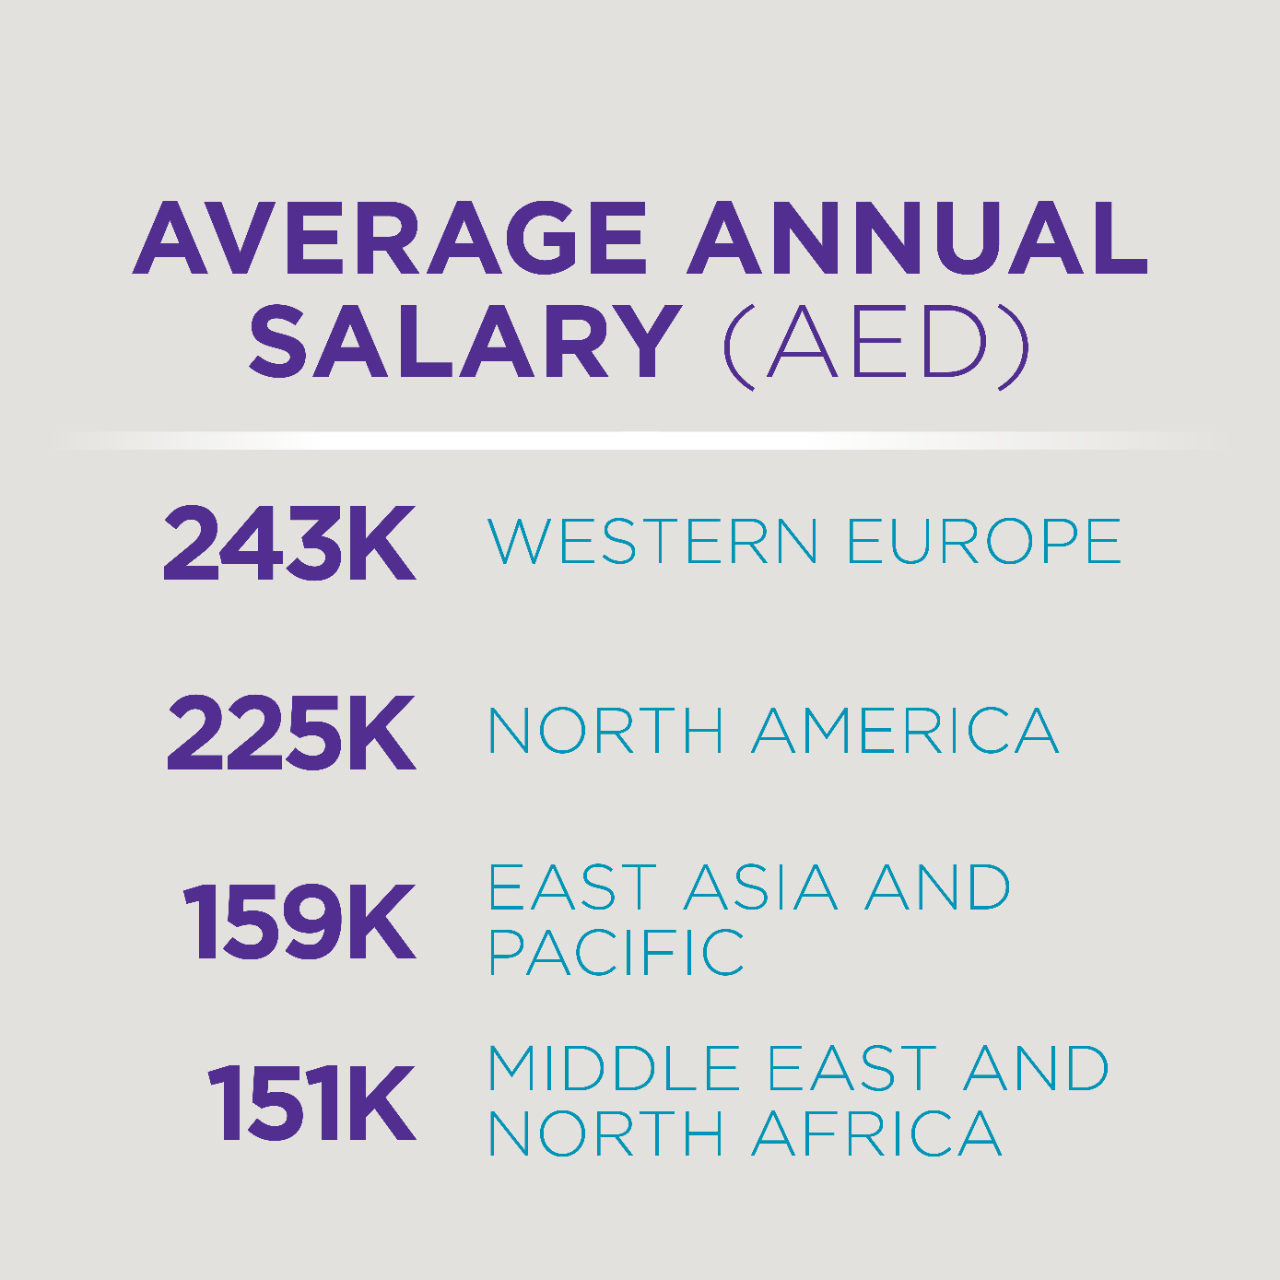 Average Annual Salary (AED): 243K - Western Europe; 225K - North America; 159K - East Asia and Pacific; 151K - Middle East and North Africa.